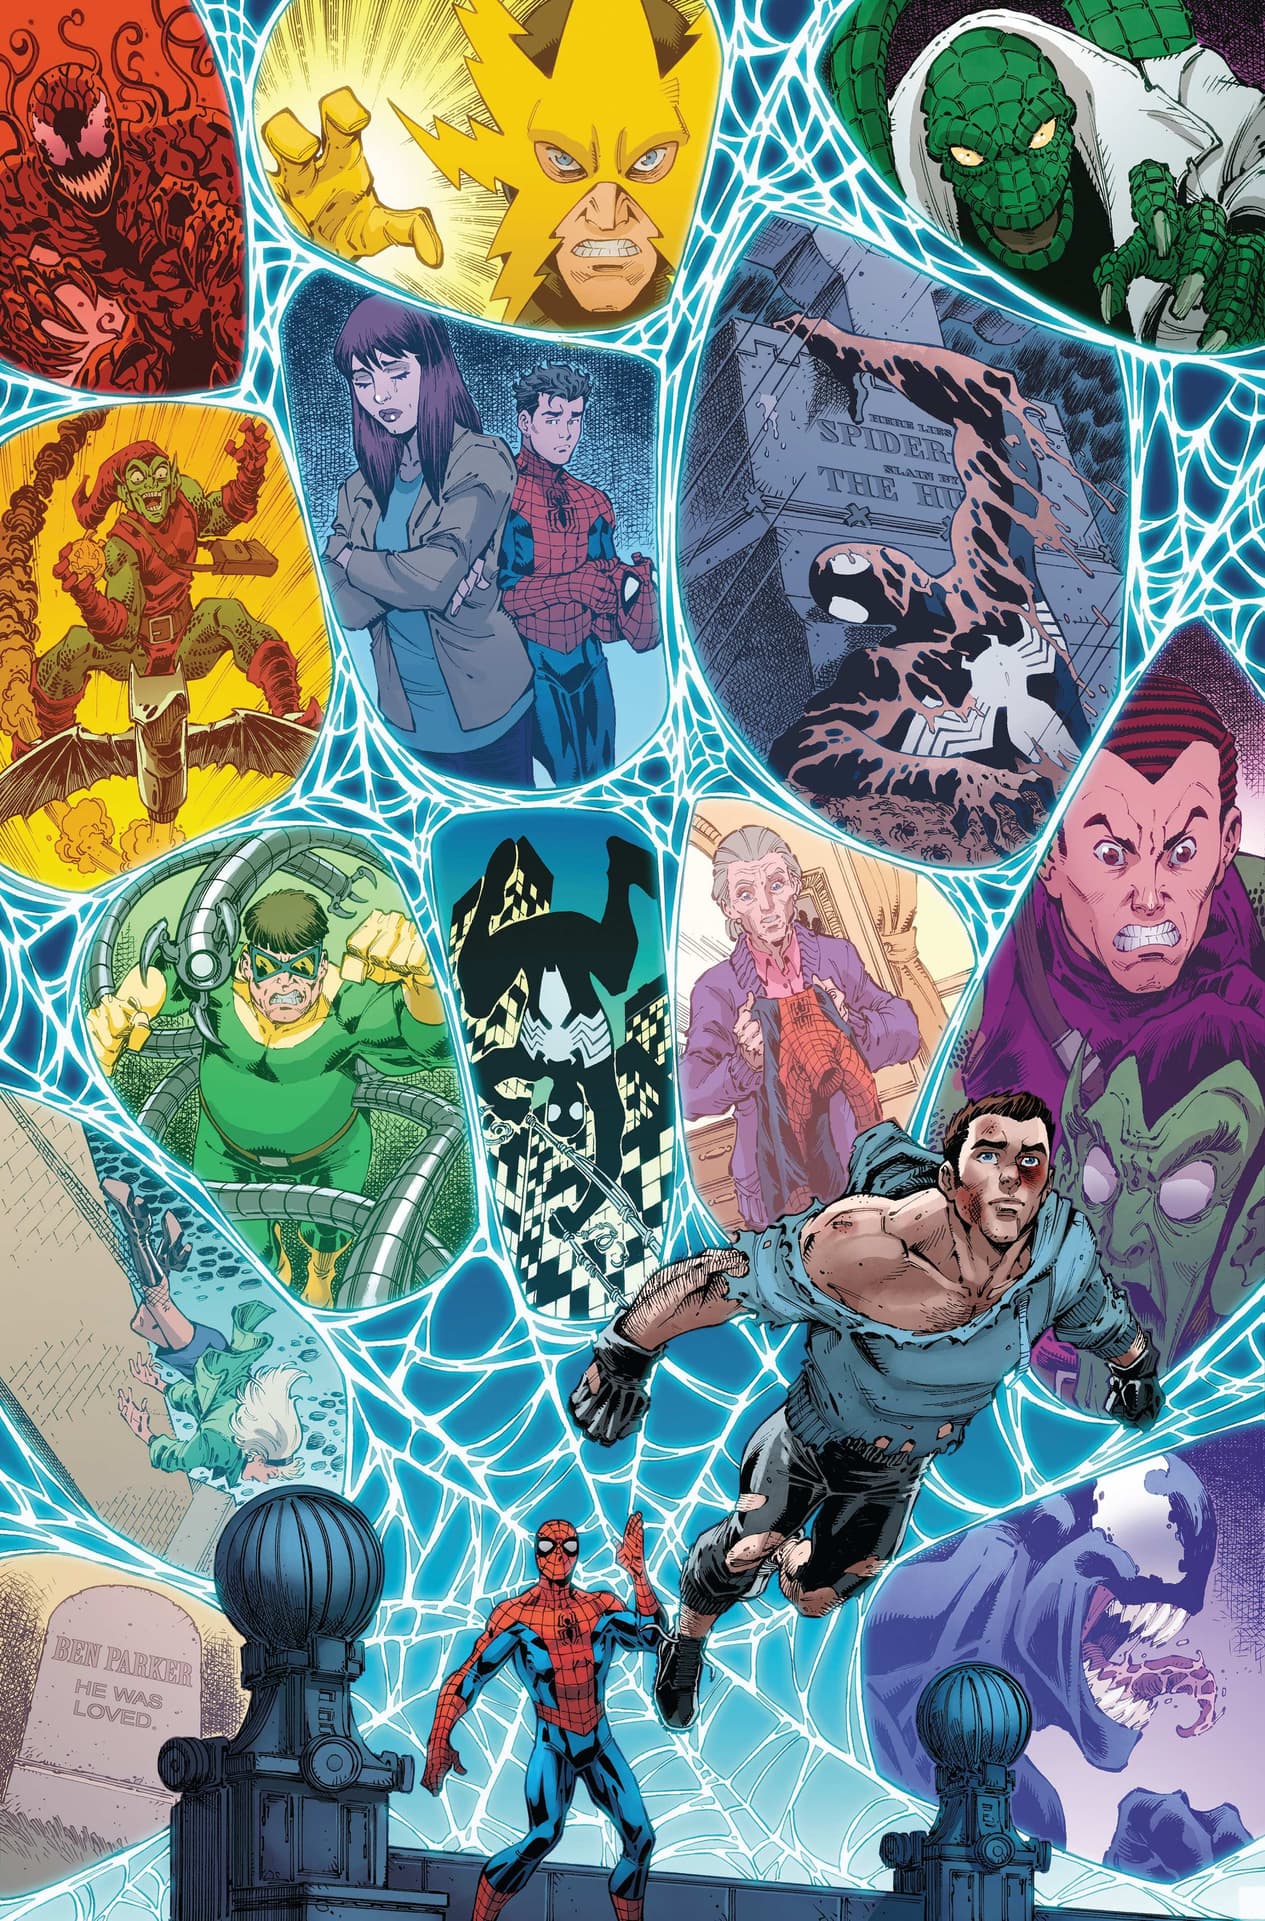 AMAZING FANTASY (2022) #1000 page by Mike Pasciullo, Todd Nauck, and Rachelle Rosenberg